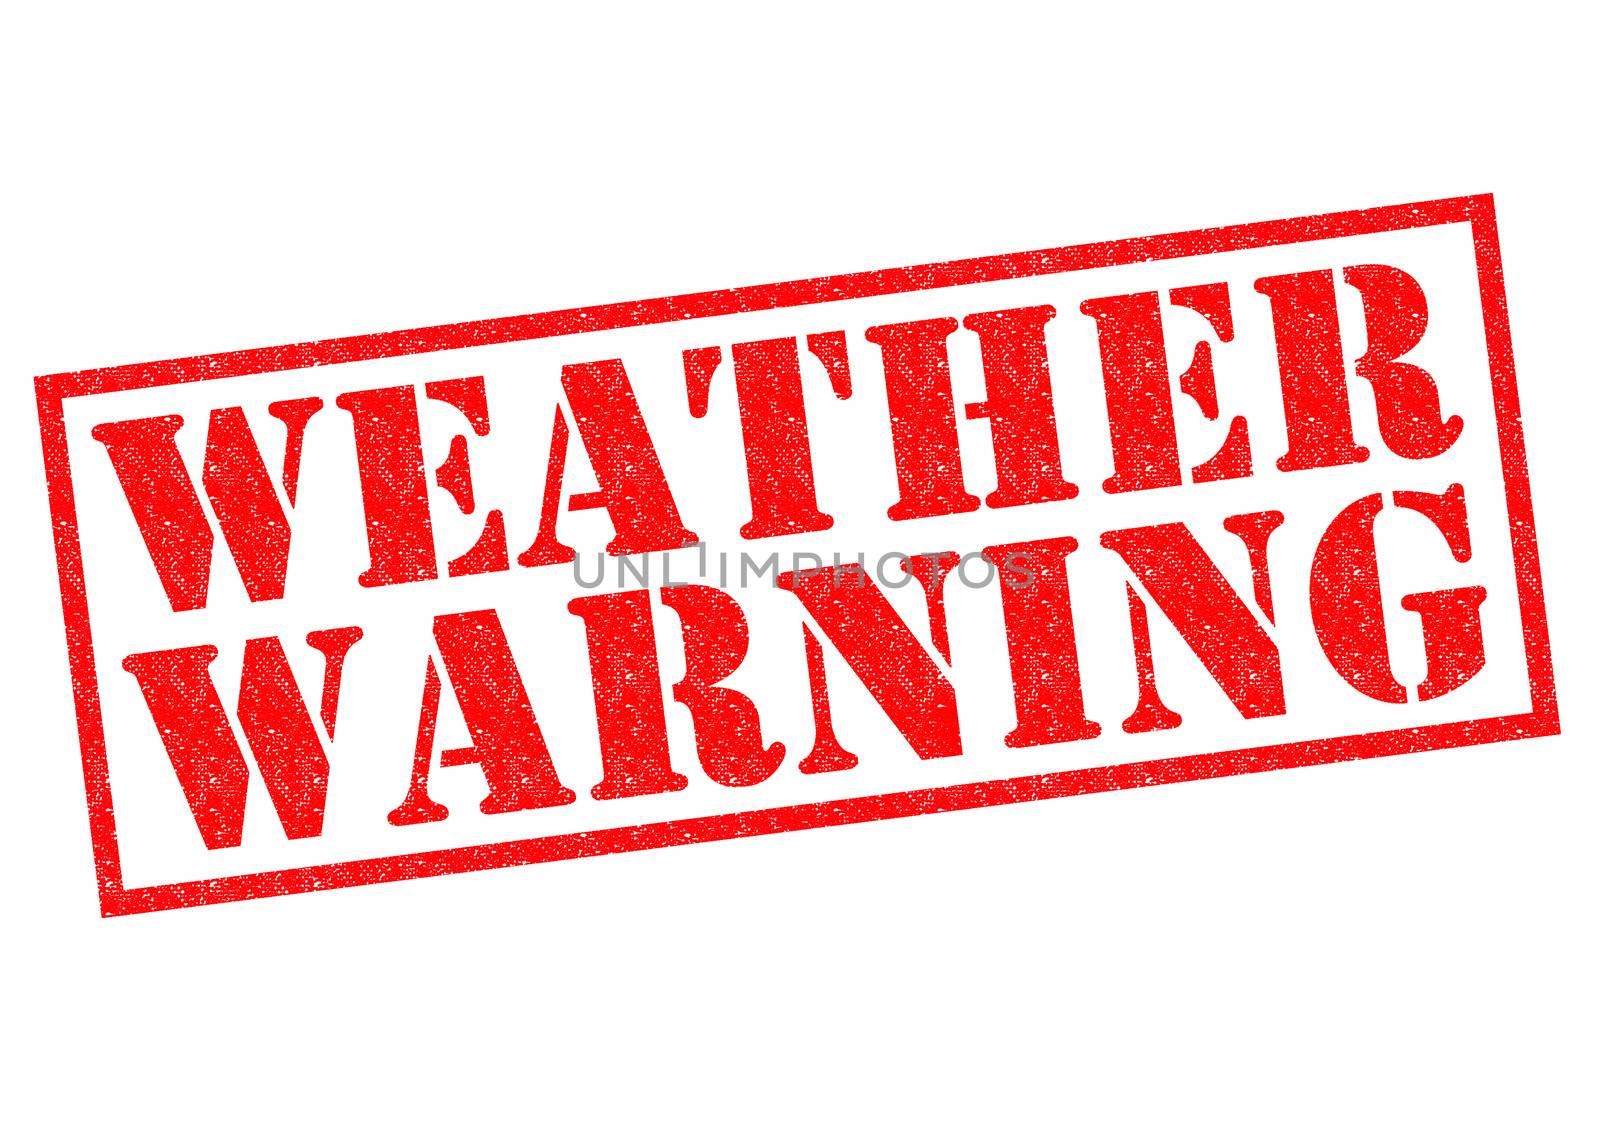 WEATHER WARNING red Rubber Stamp over a white background.